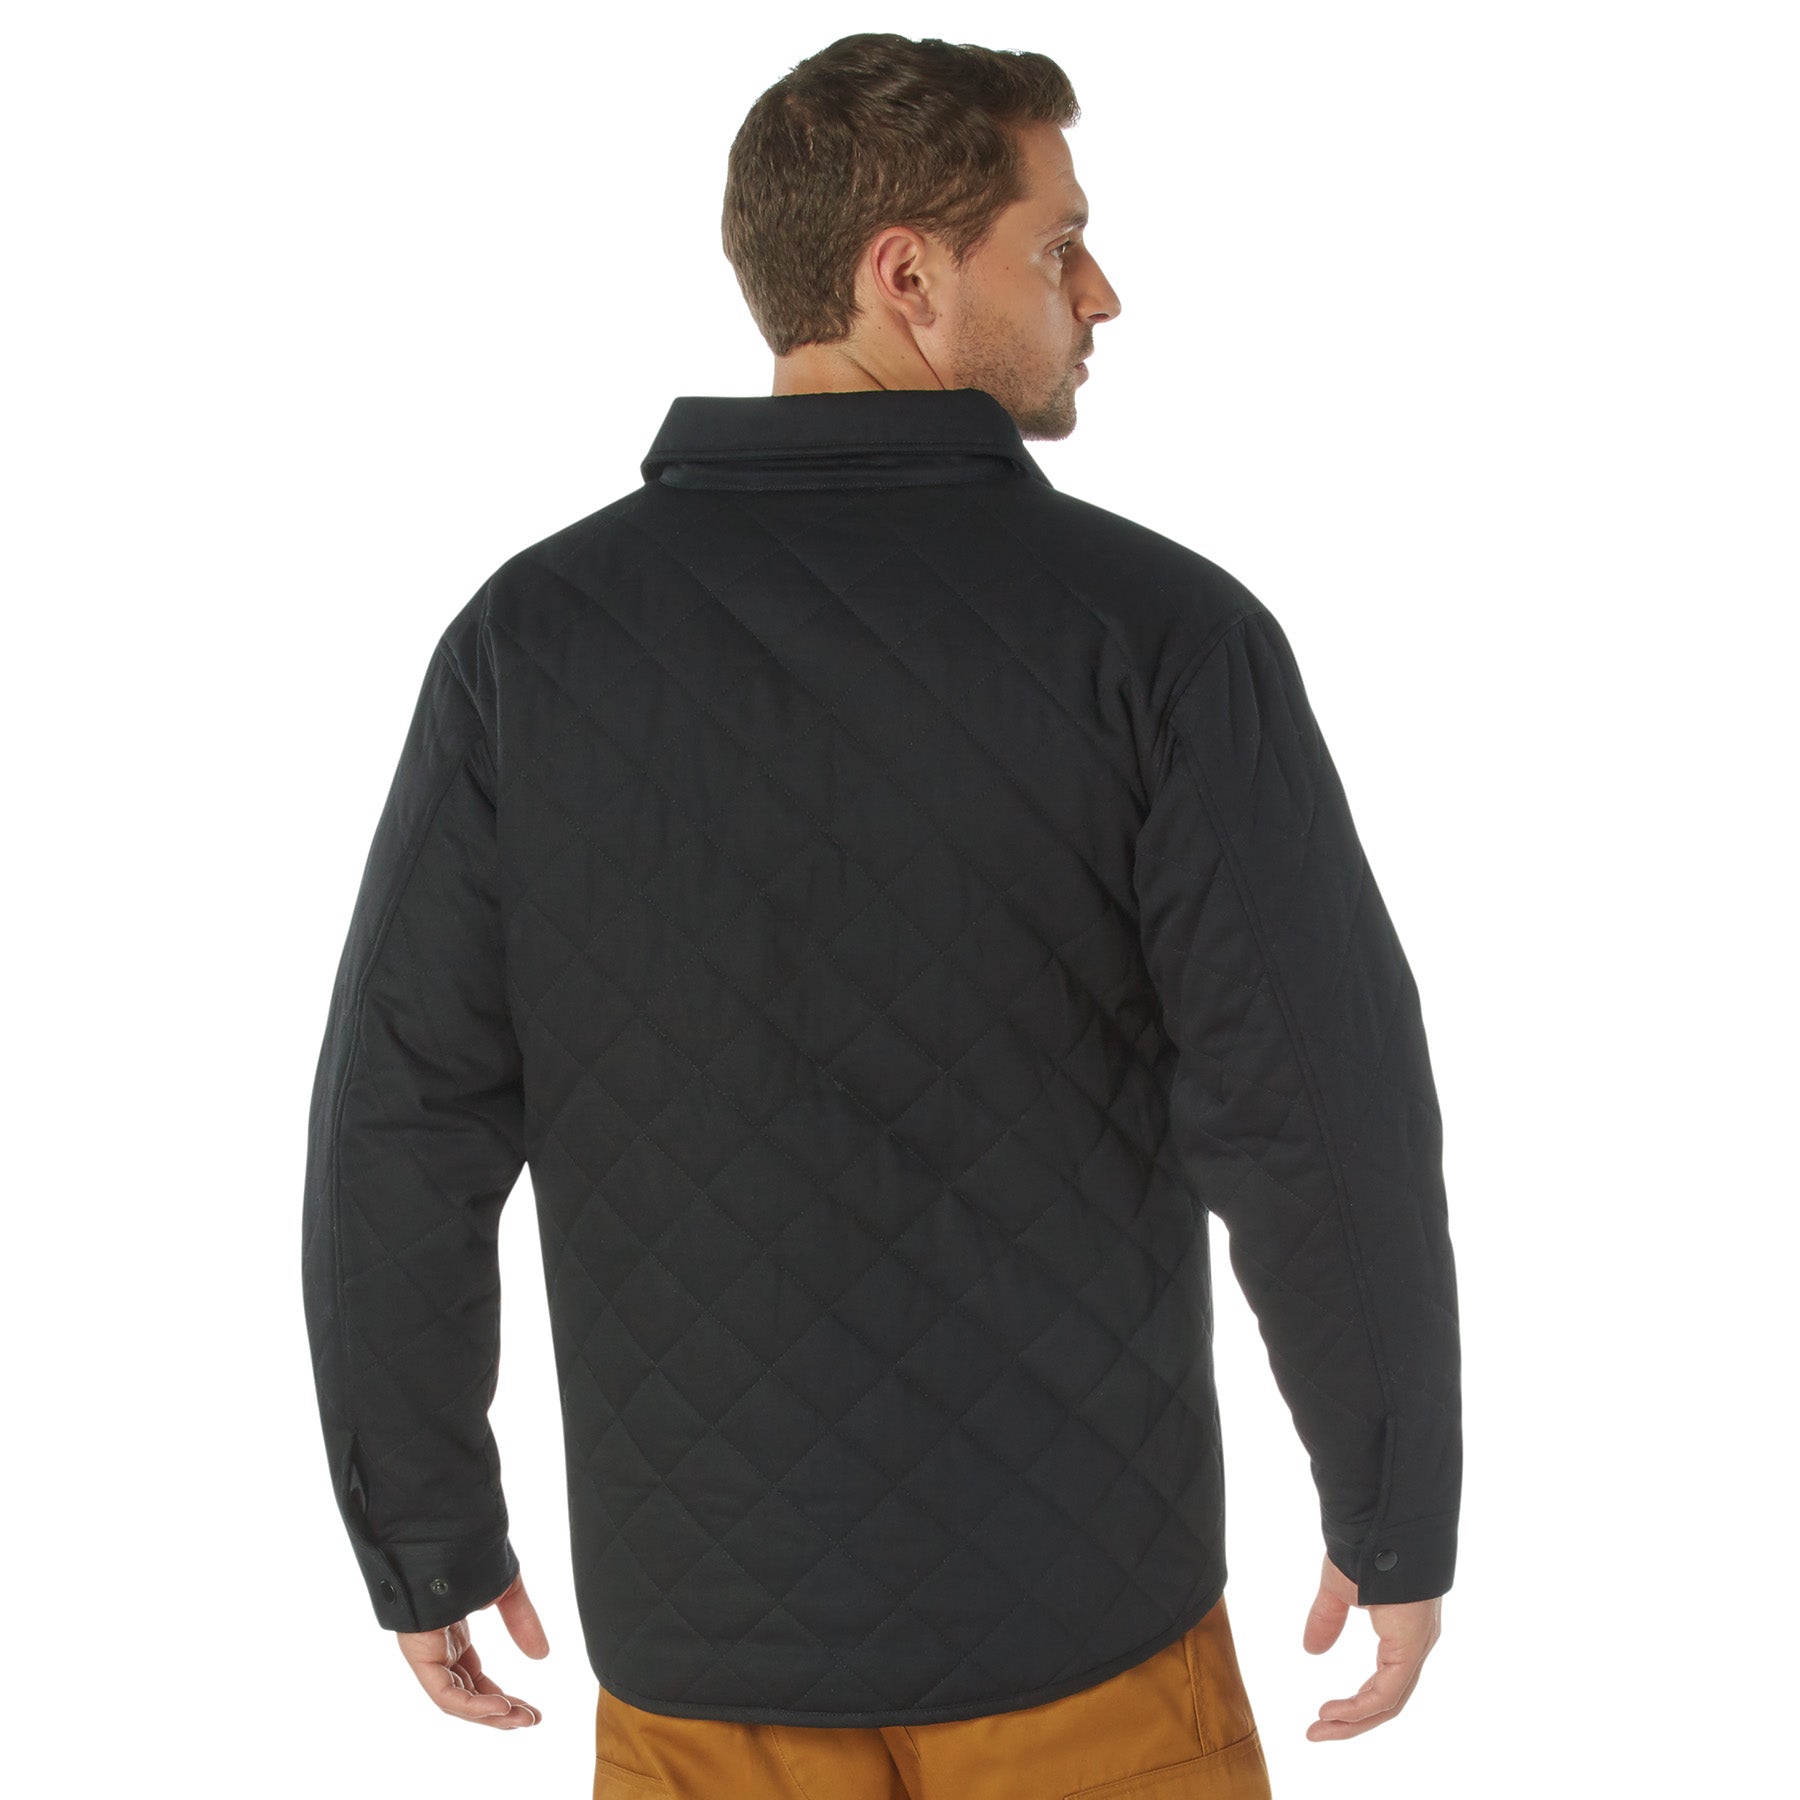 M&S MENS' DIAMOND Quilted JACKET with Stormwear ~ Size S ~ GREY Mix (rrp  £89) £29.99 - PicClick UK